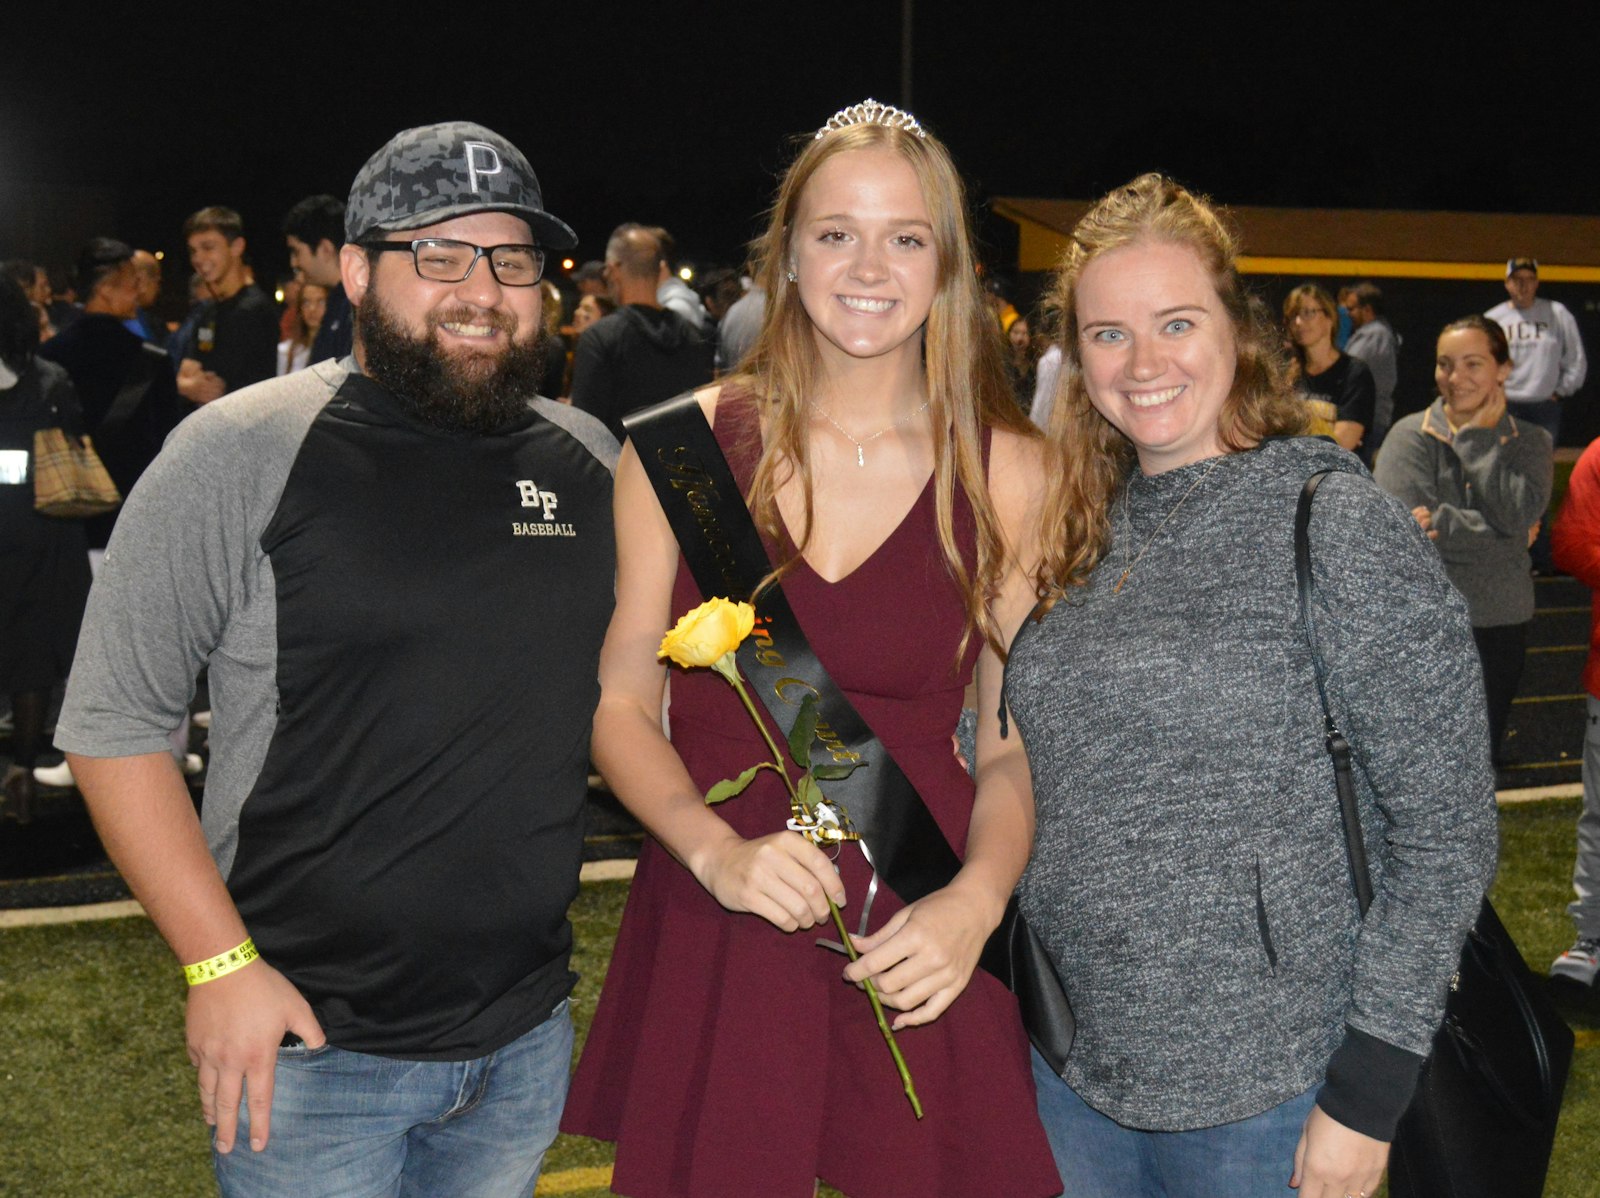 Melanie Moore, Class of 2022, is flanked by her cousin, Jessica Ortisi, Class of 2009, and Jessica's high school sweetheart, Joe Ortisi, Class of 2009, all of whom are Bishop Foley Catholic High School graduates.